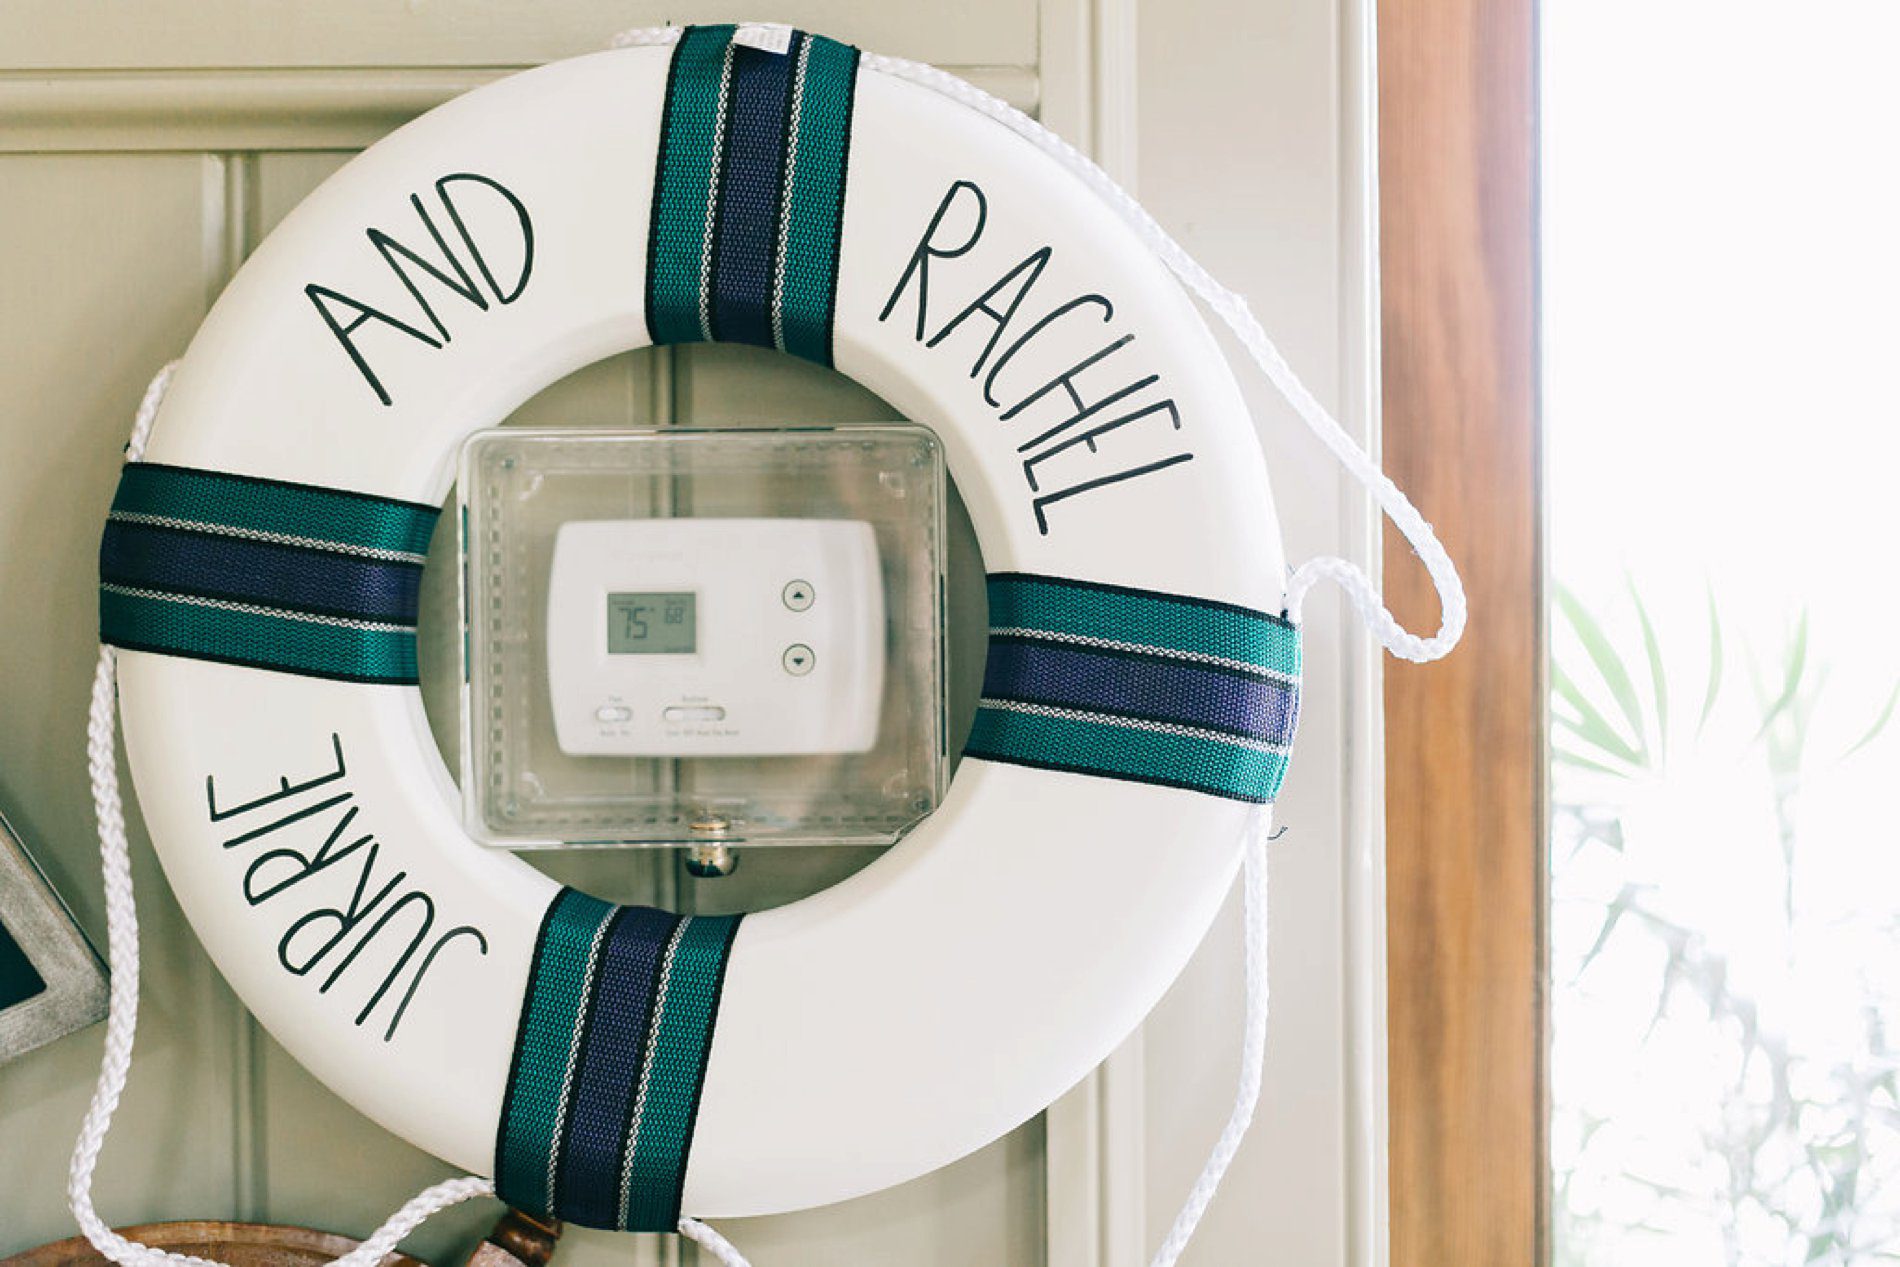 Customized life preserver with bride and grooms name